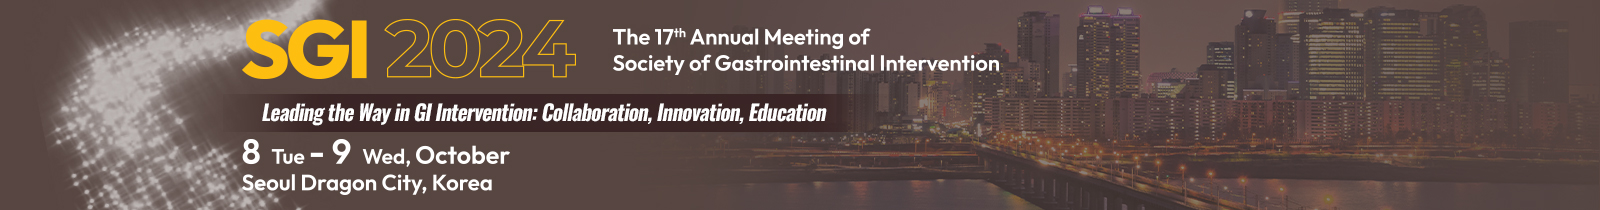 SGI 2024 The 17th Annual Meeting of Society of Gastrointestinal Intervention